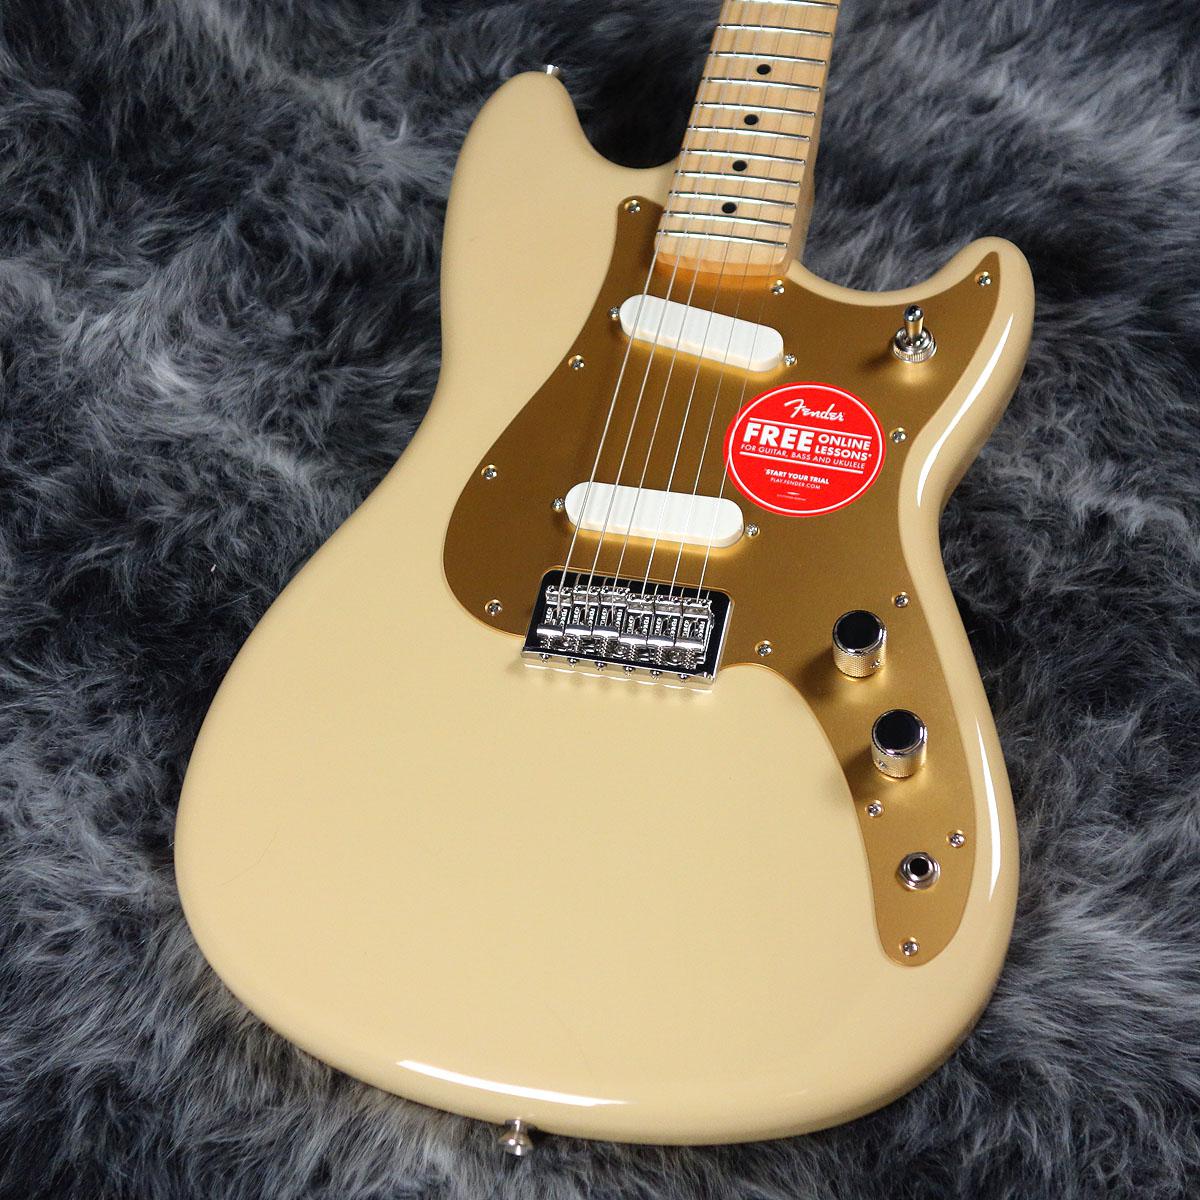 Fender Mexico DUO SONIC デュオソニック フェンダーギター - ギター